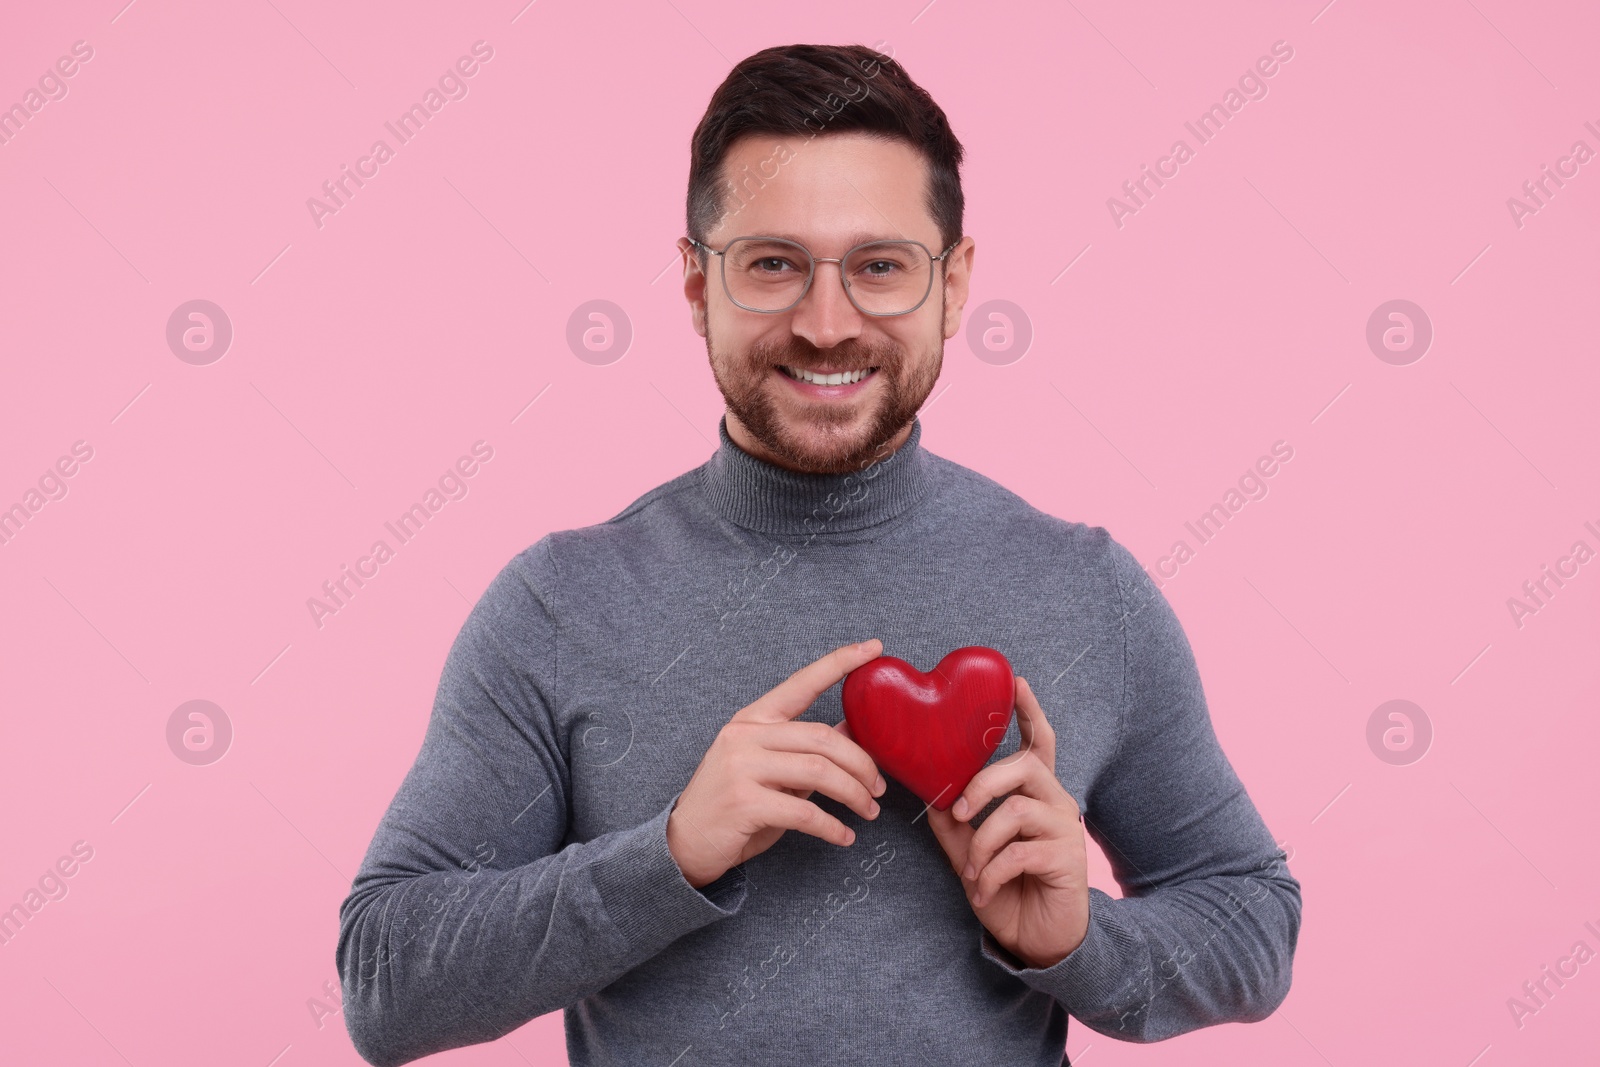 Photo of Happy man holding red heart on pink background